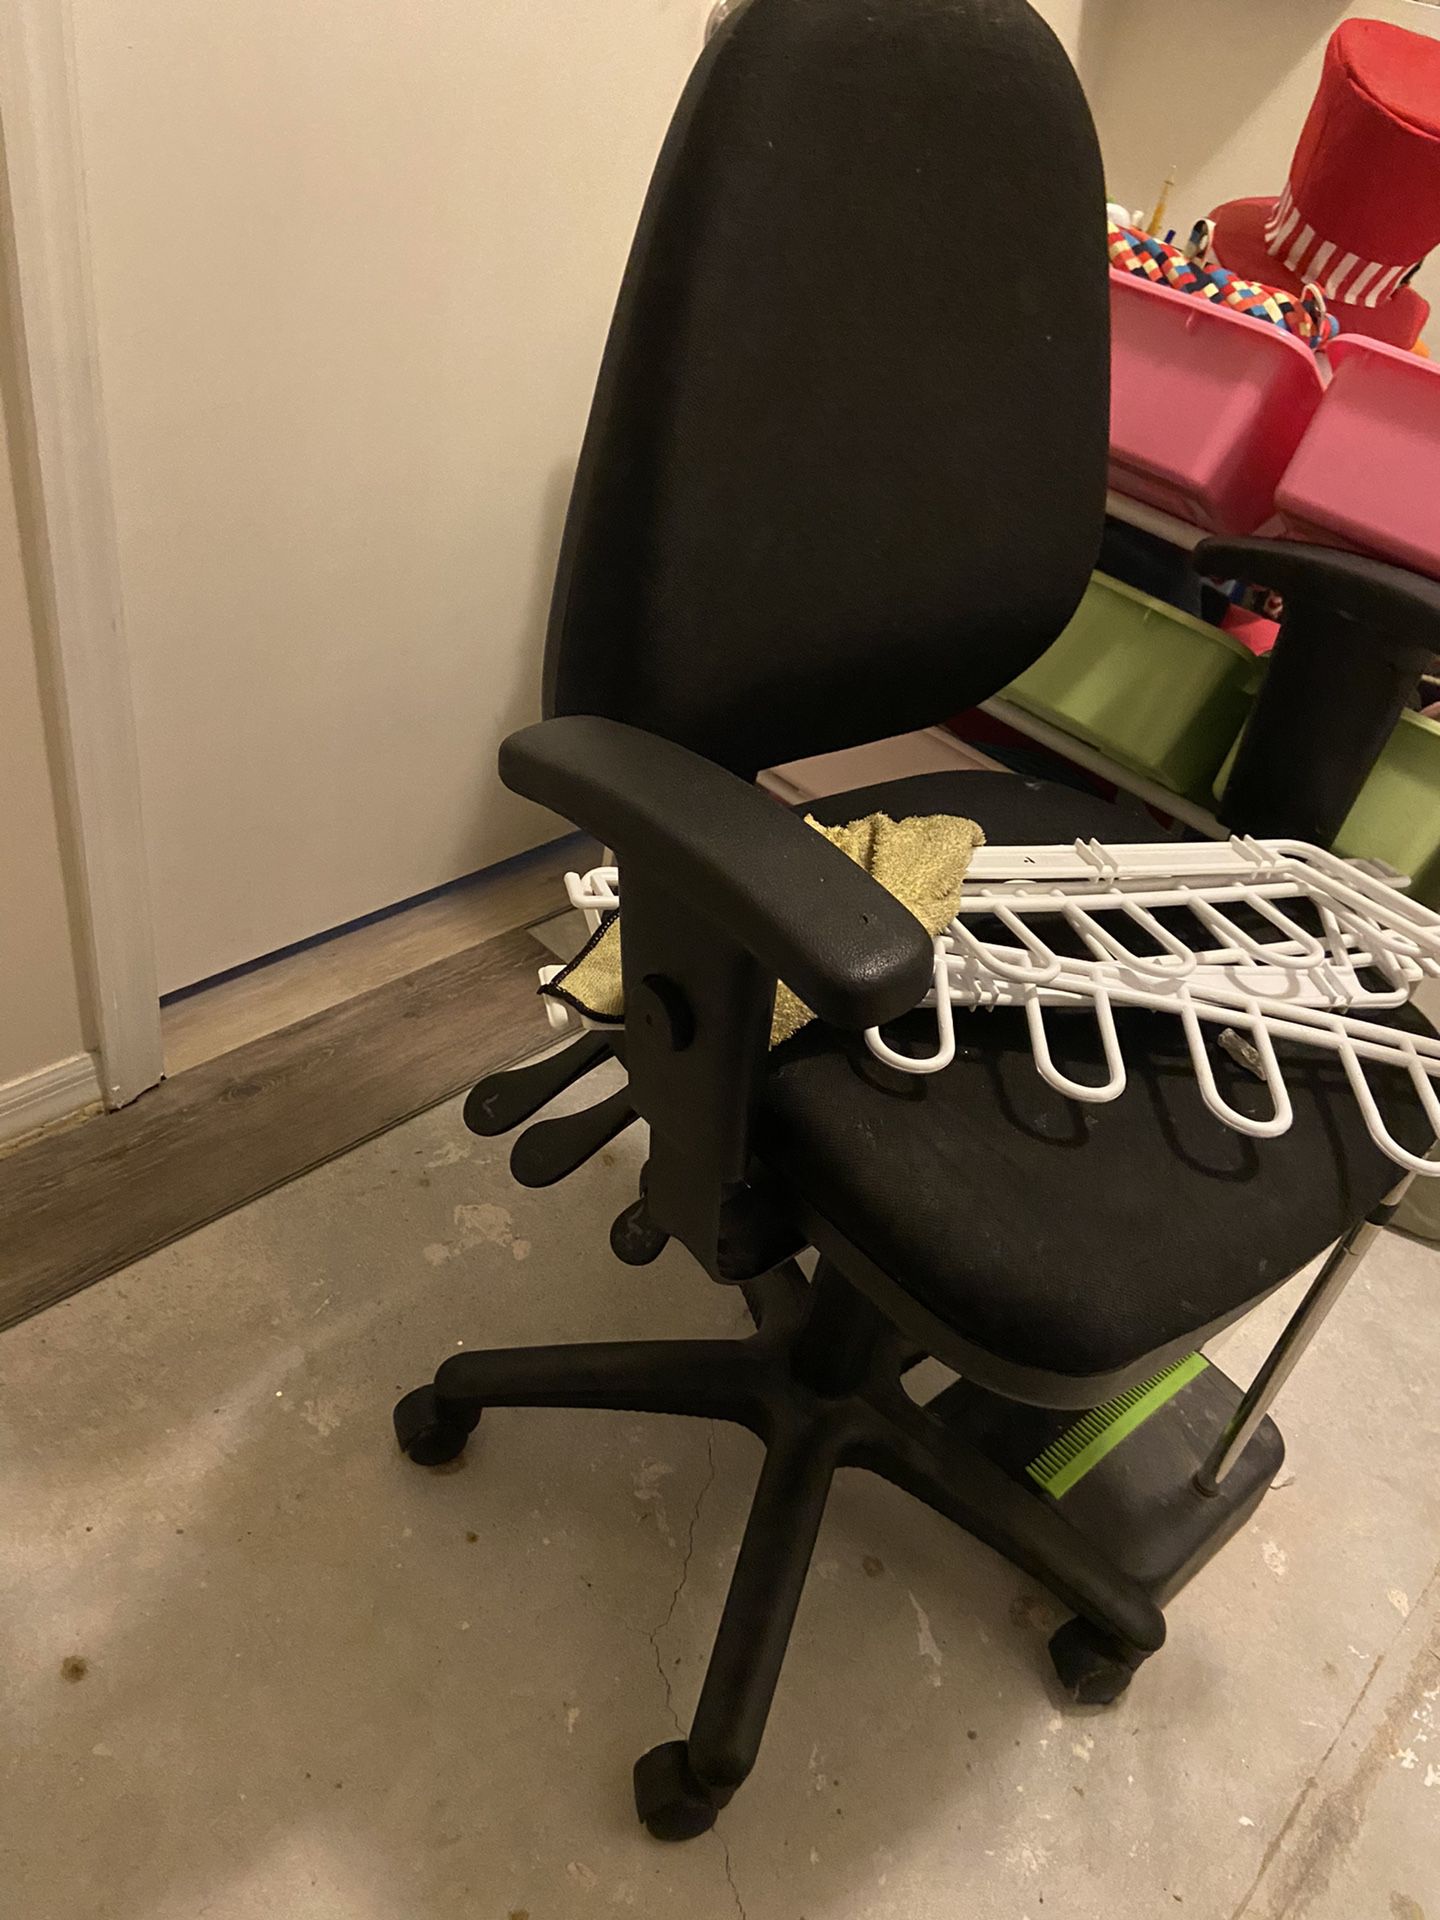 Free desk with chair